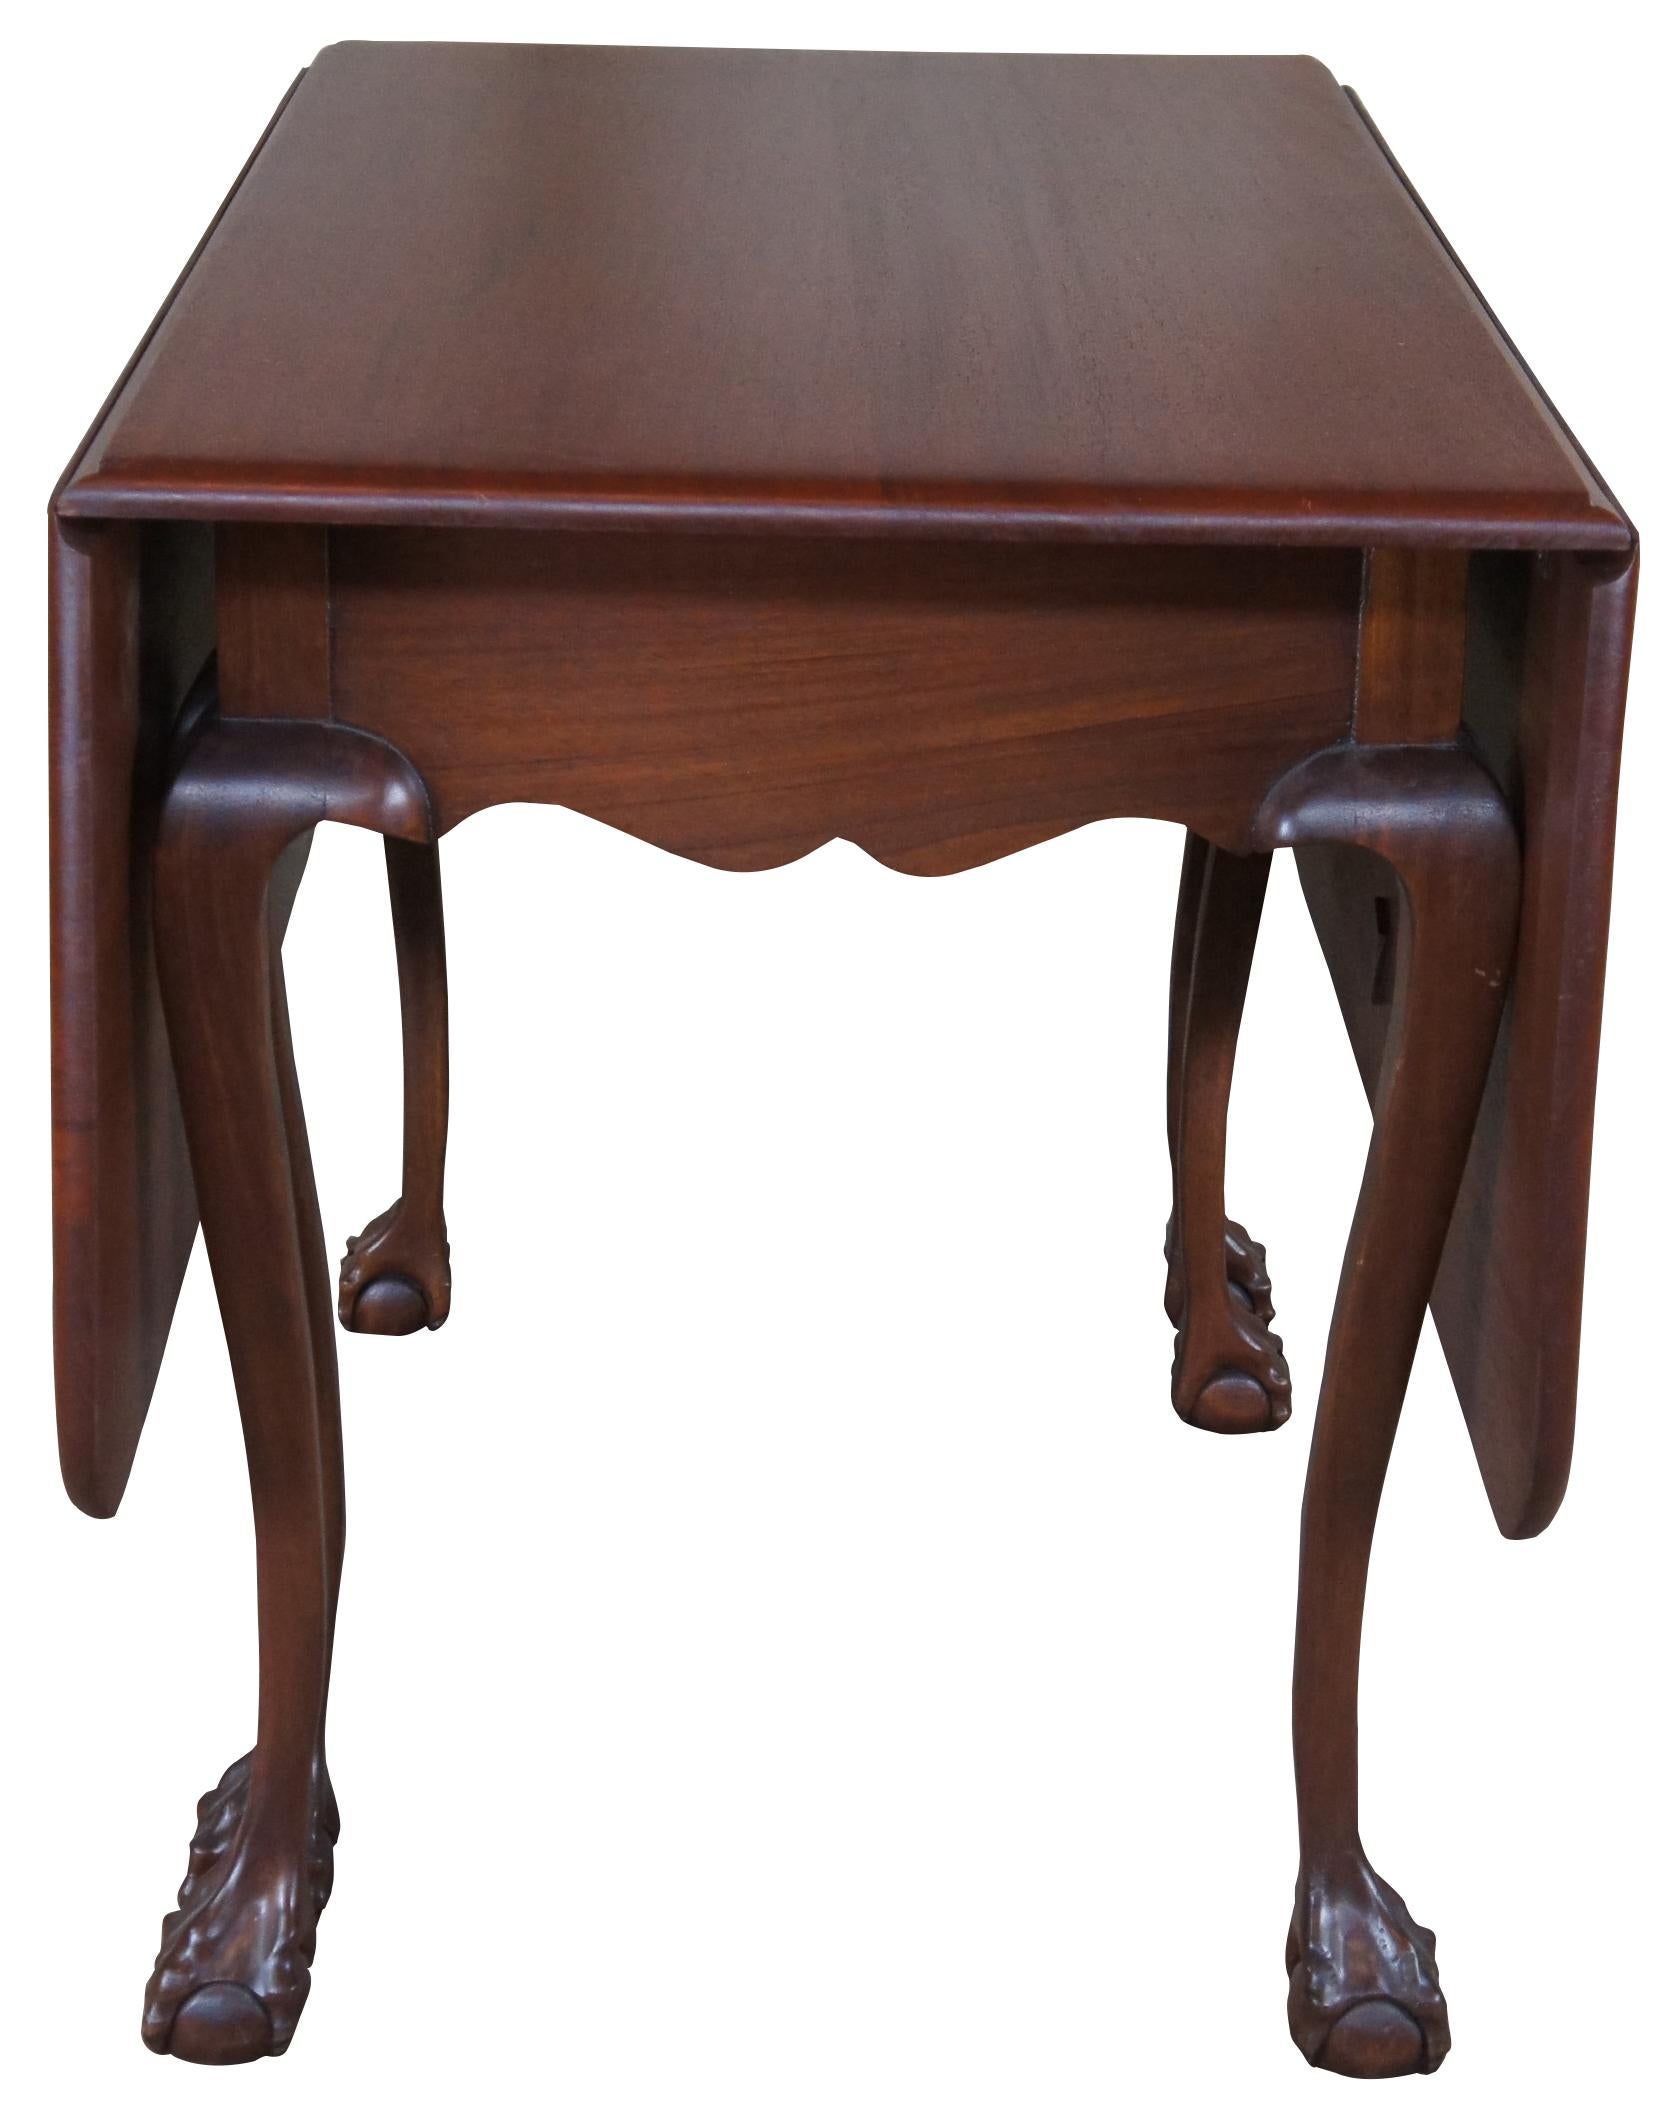 20th century drop leaf gateleg dining table. Made of mahogany featuring a rectangular form with serpentine apron. Features two large drop leaves and six legs with ball and claw feet.

Measures: 44